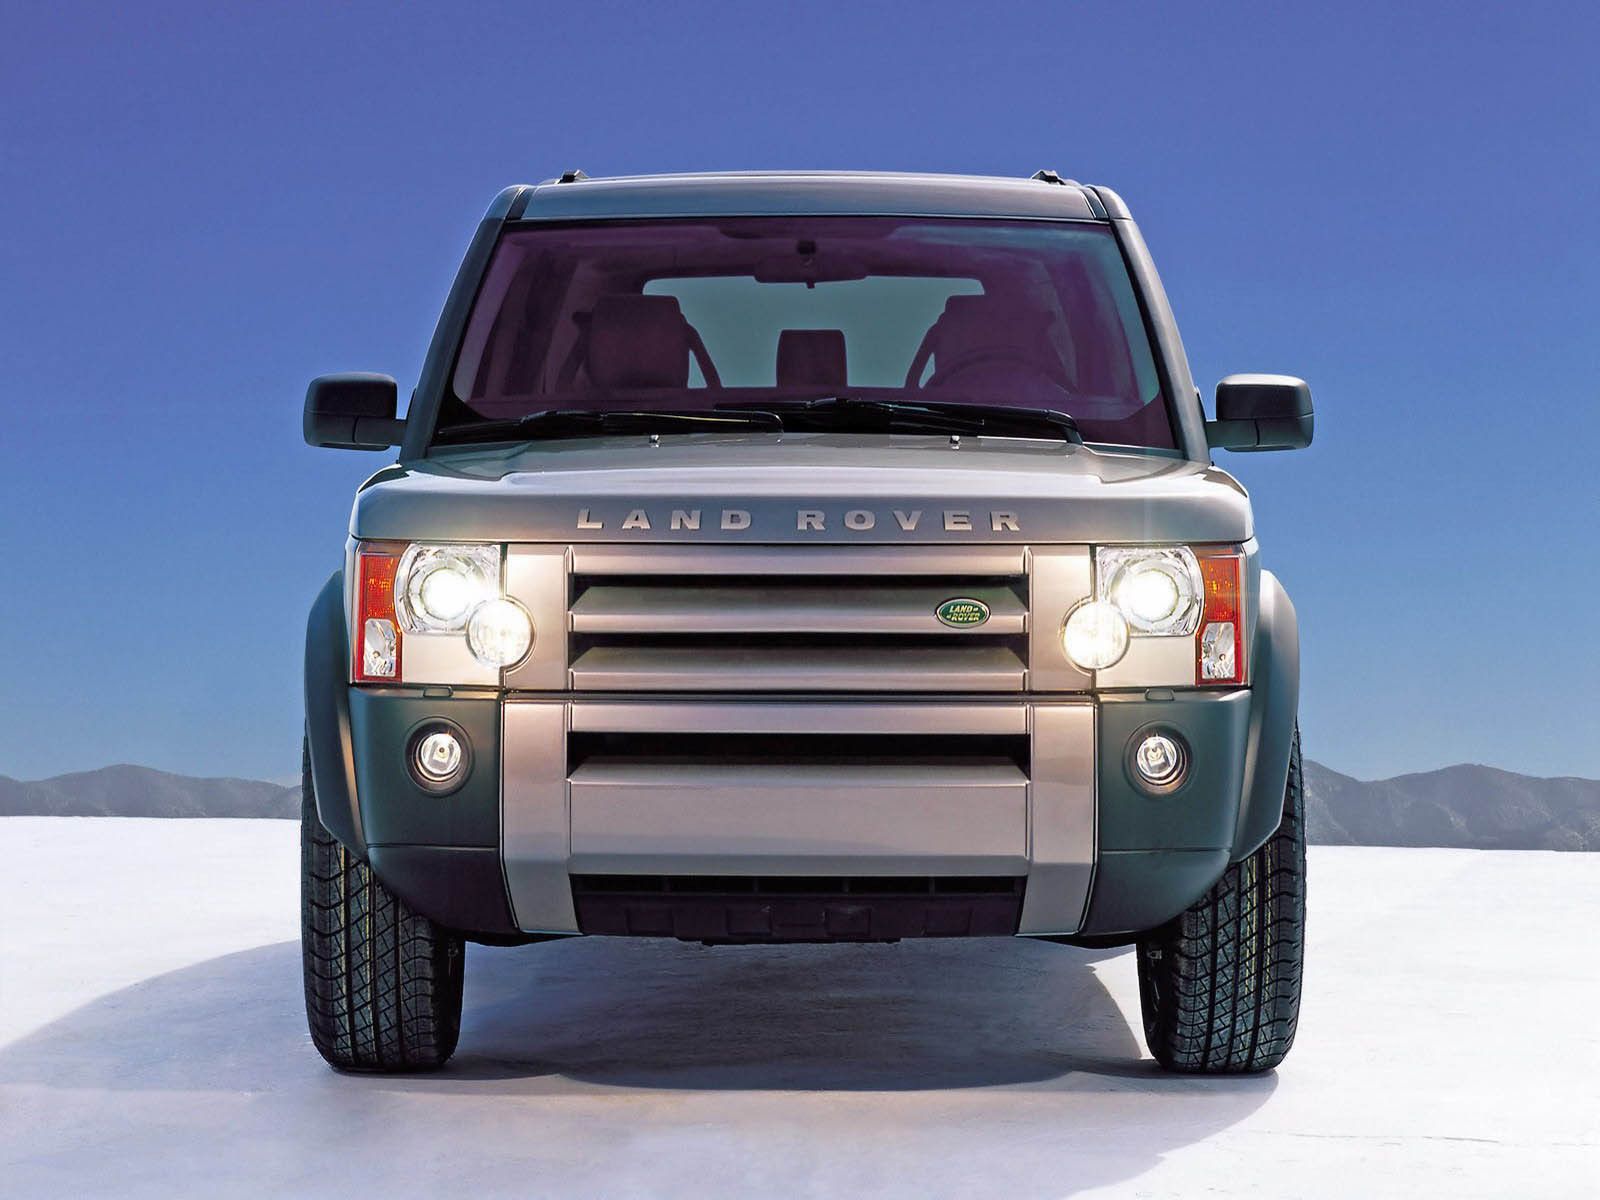 Teal-colored Land Rover Discovery 3 Front Profile